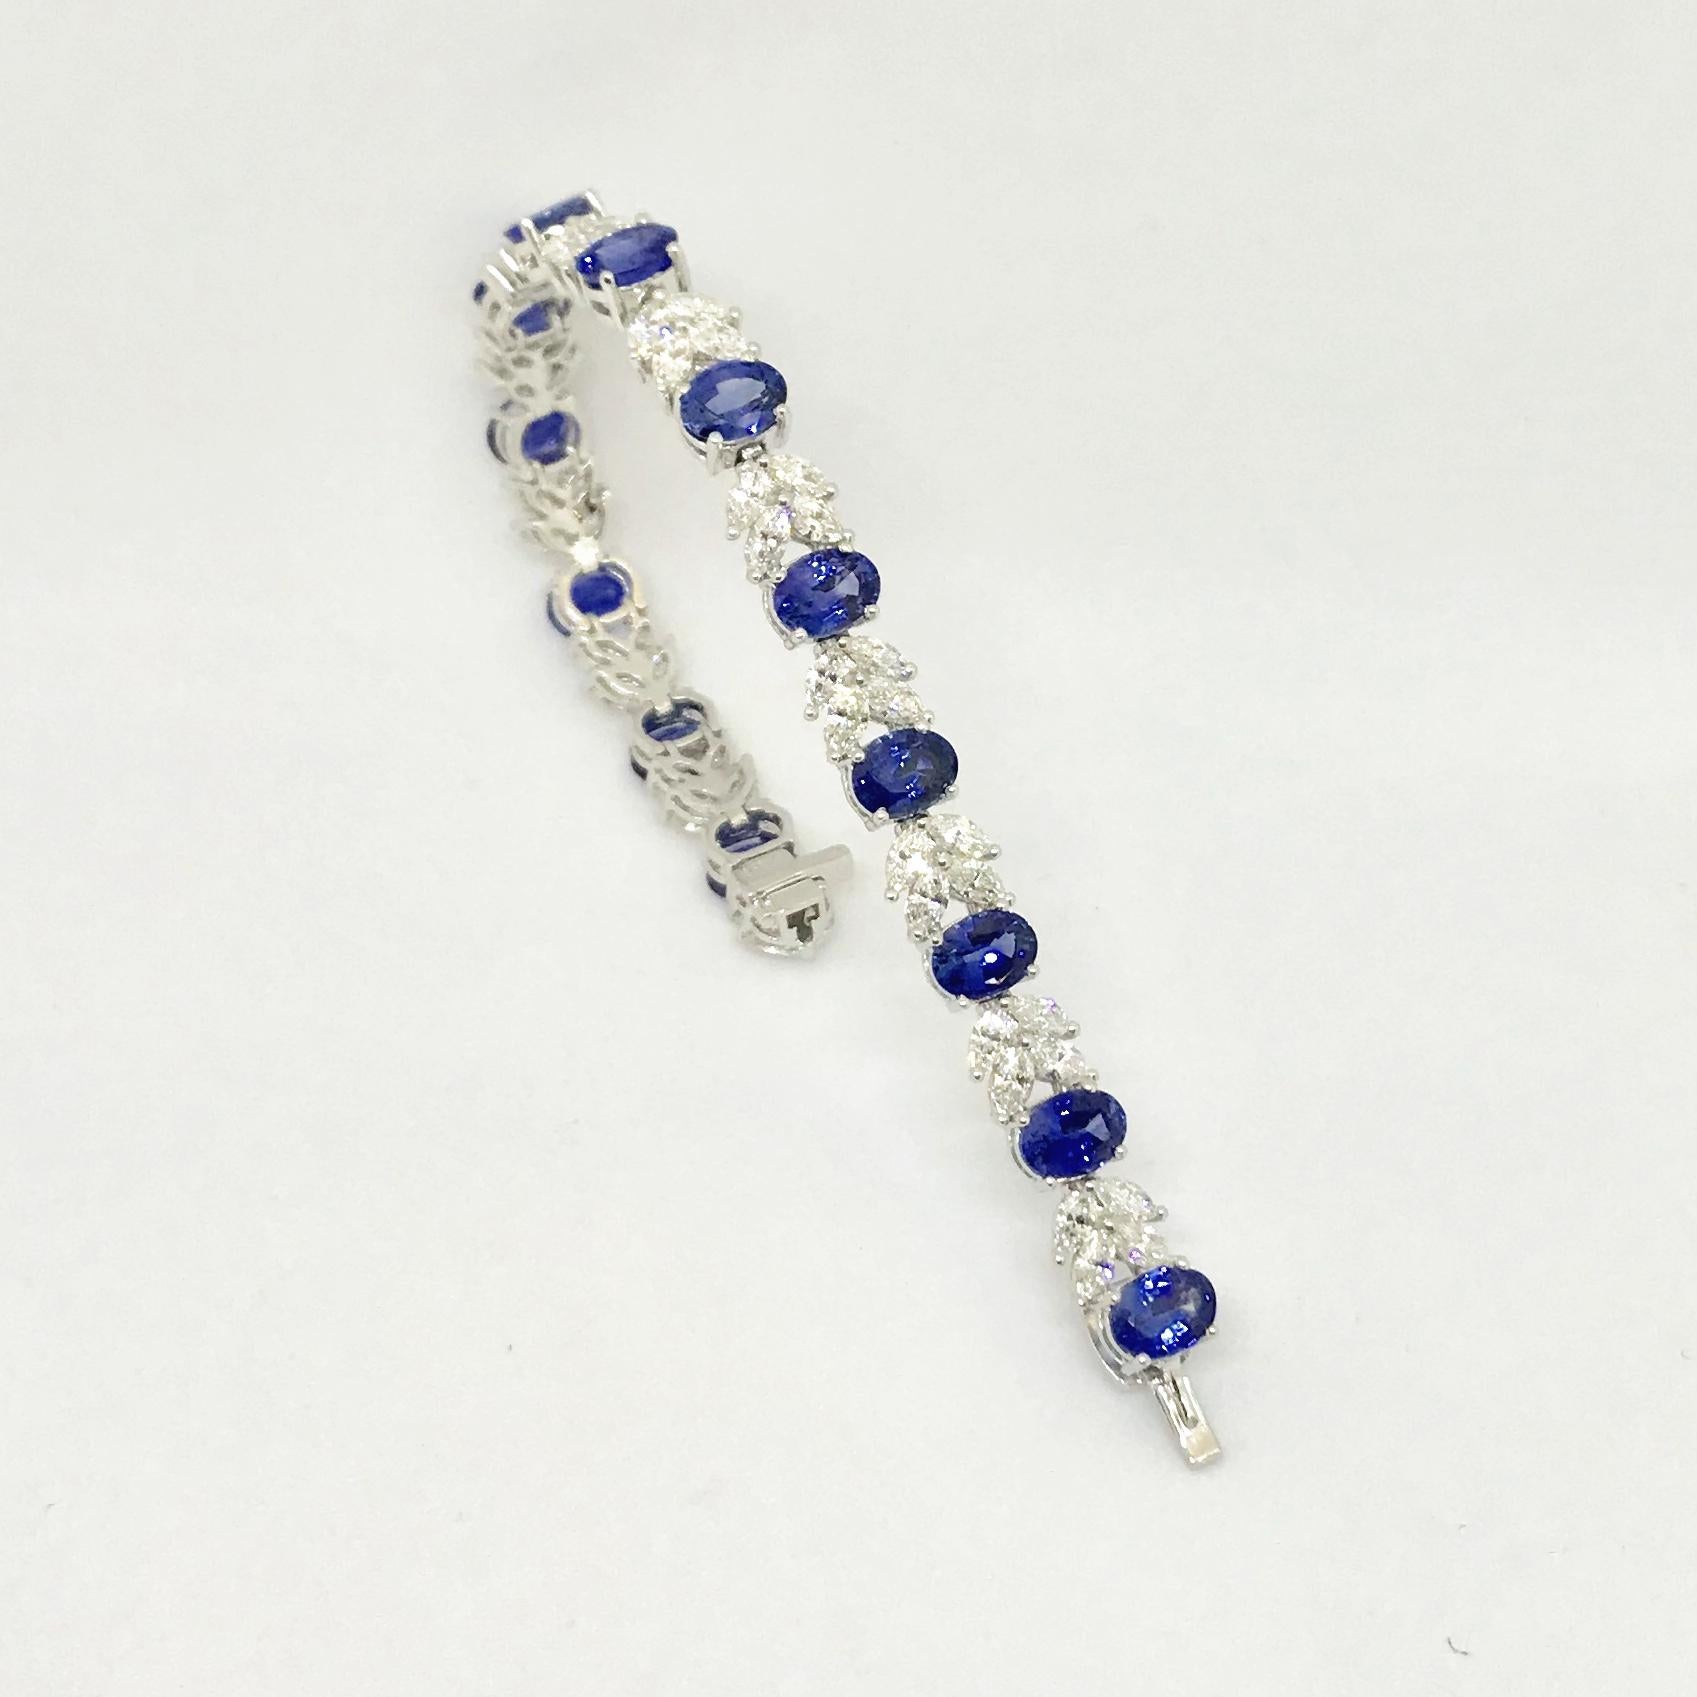 Platinum, 13-oval blue sapphires alternated with 13-sections of 4- marquise cut diamonds. The gems are mounted in prong basket settings. The fine blue, well-matched Ceylon sapphires total 18.44 cts, and the 52- diamonds total
7.70 cts that are